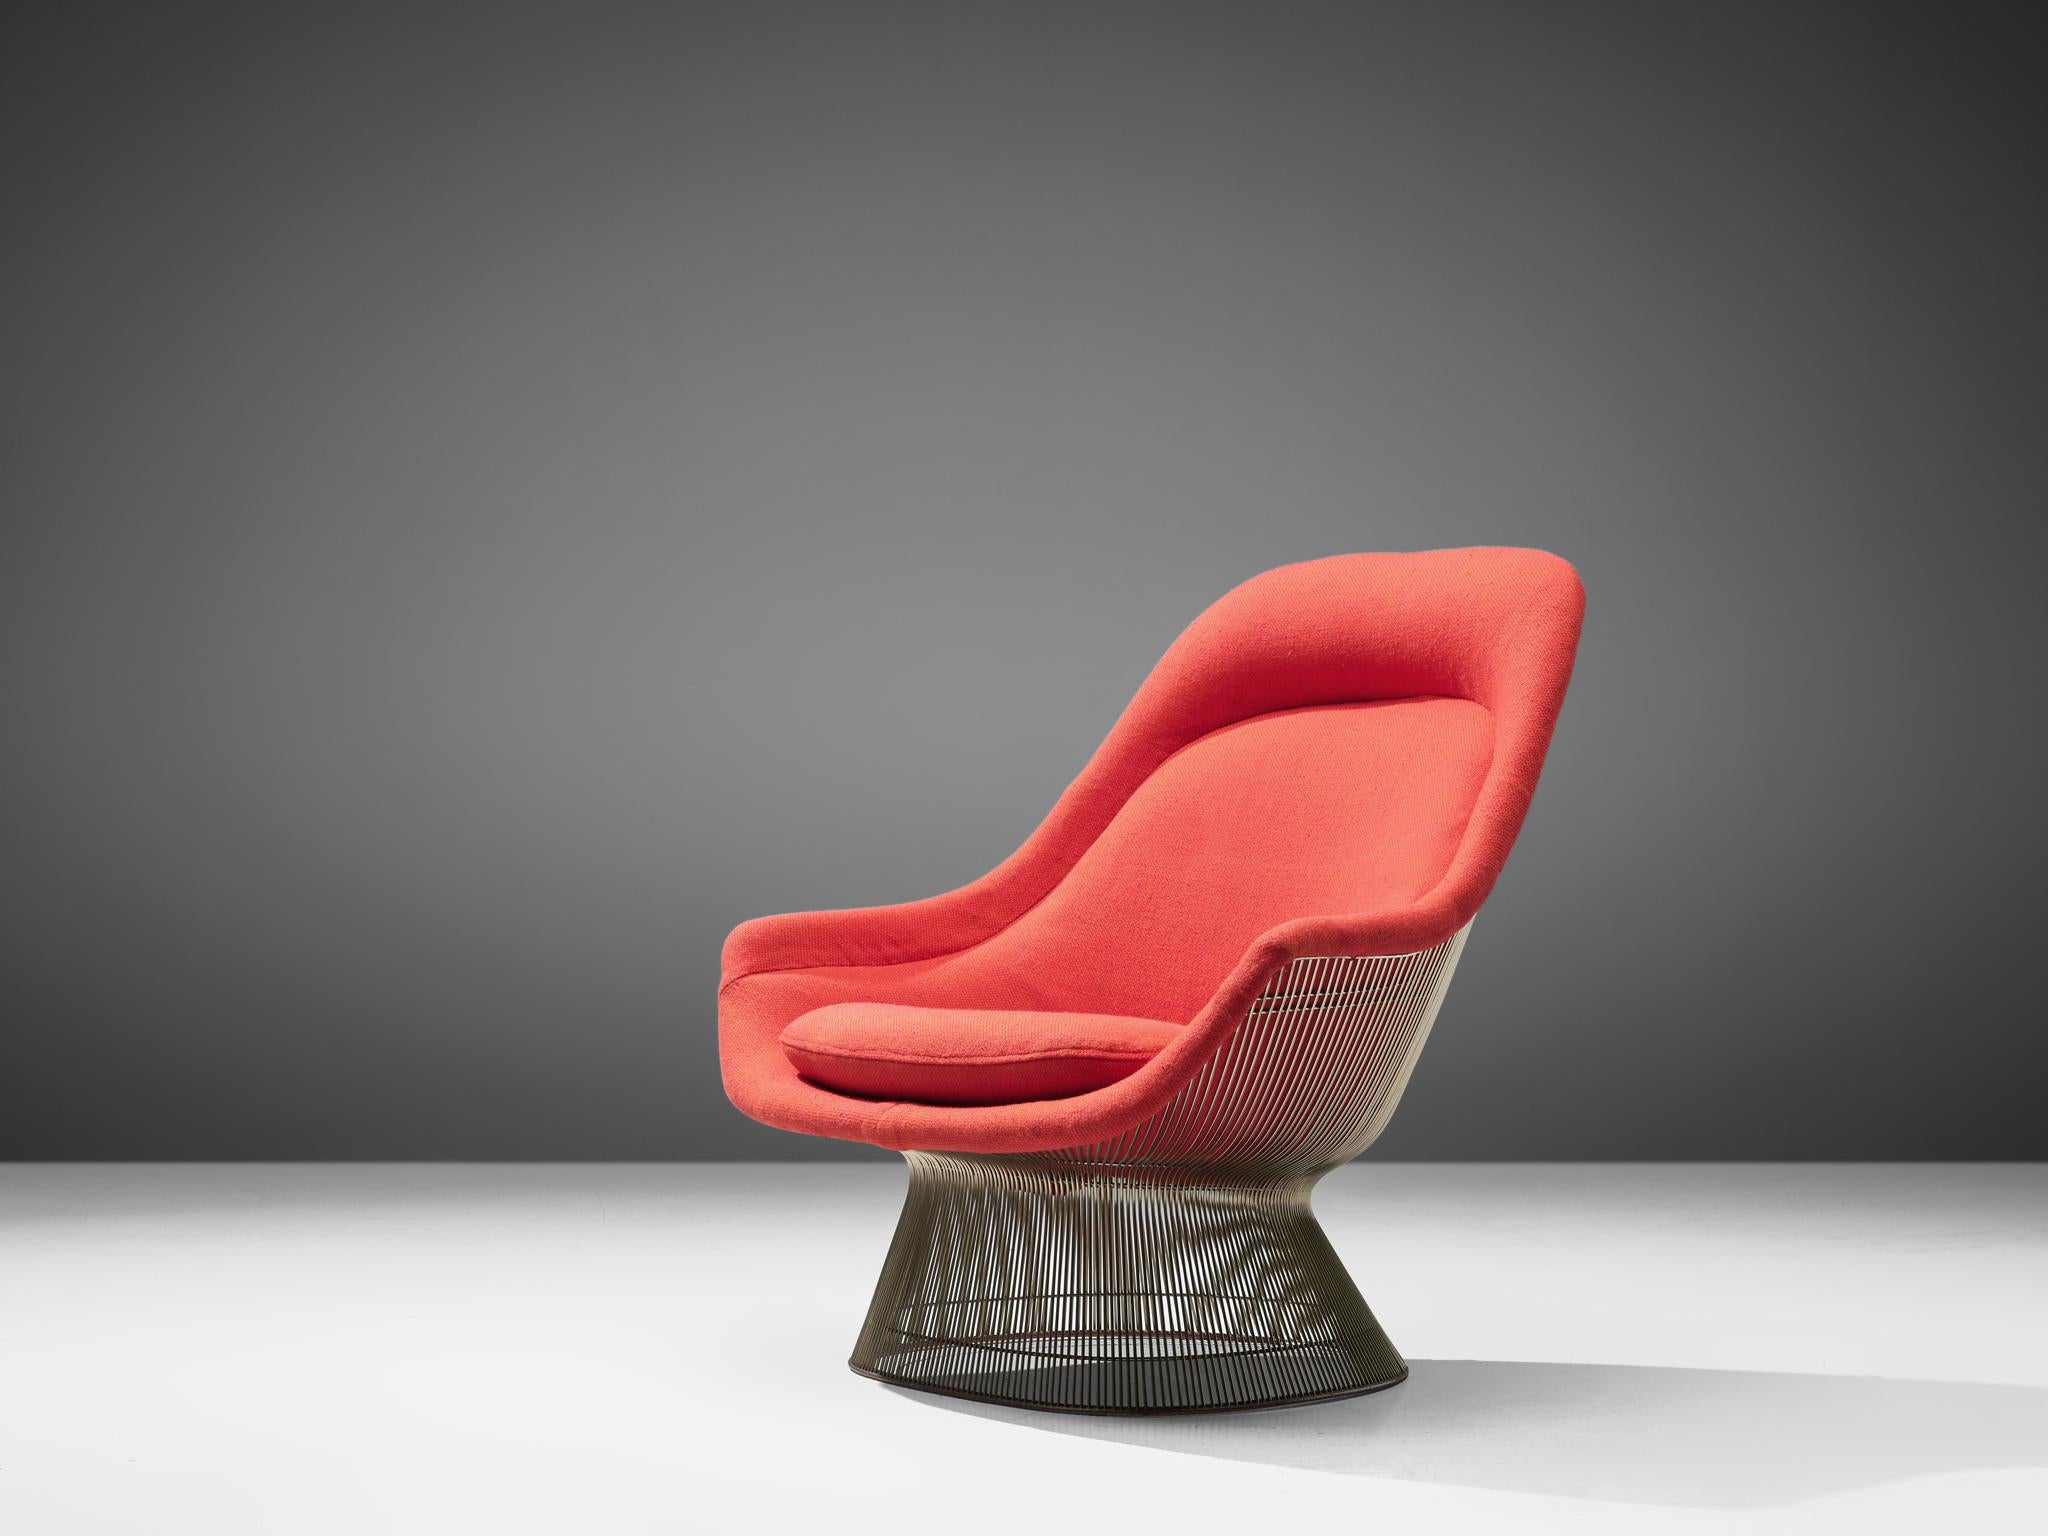 Warren Platner for Knoll, lounge chair 'model 1705', steel and red fabric, United States, 1966.

This iconic beige easy chair by Warren Platner is created by welding curved steel rods to circular and semi-circular frames, simultaneously serving as